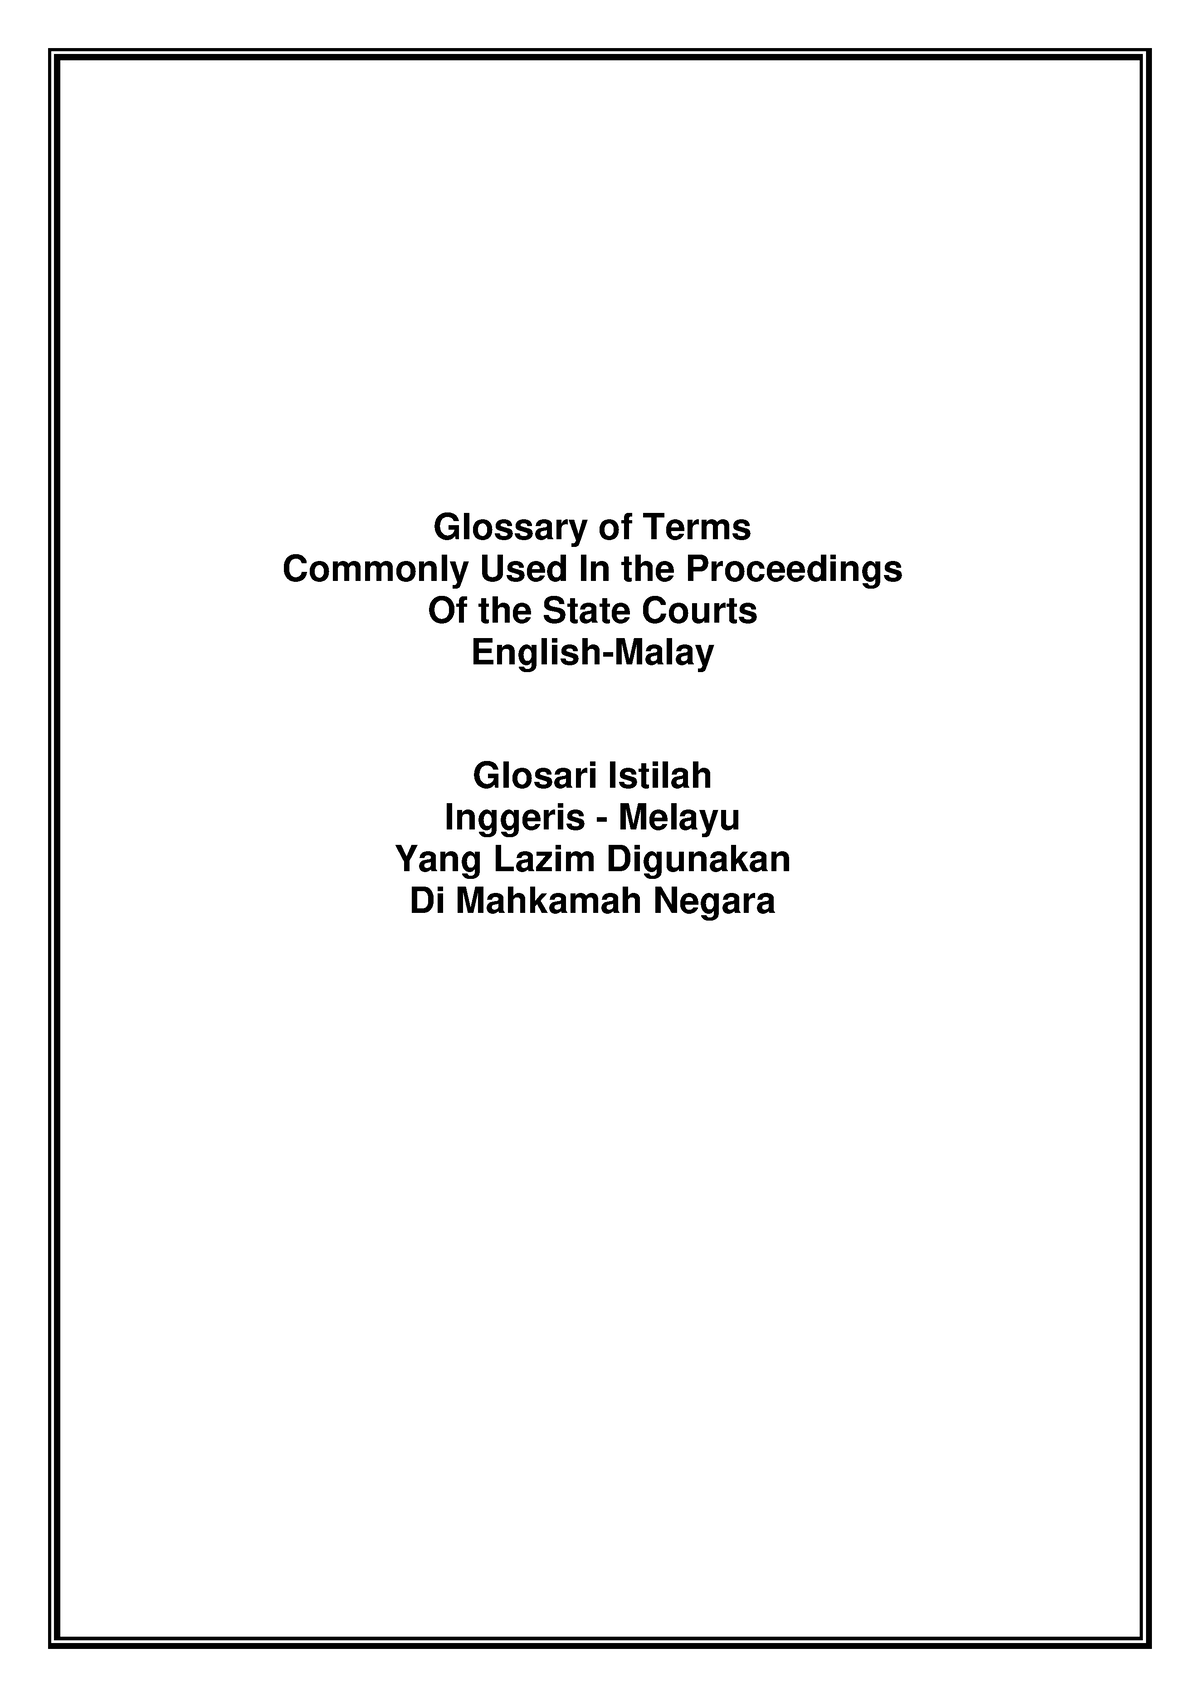 Glossary OF Terms IN Court Glossary of Terms Commonly Used In the